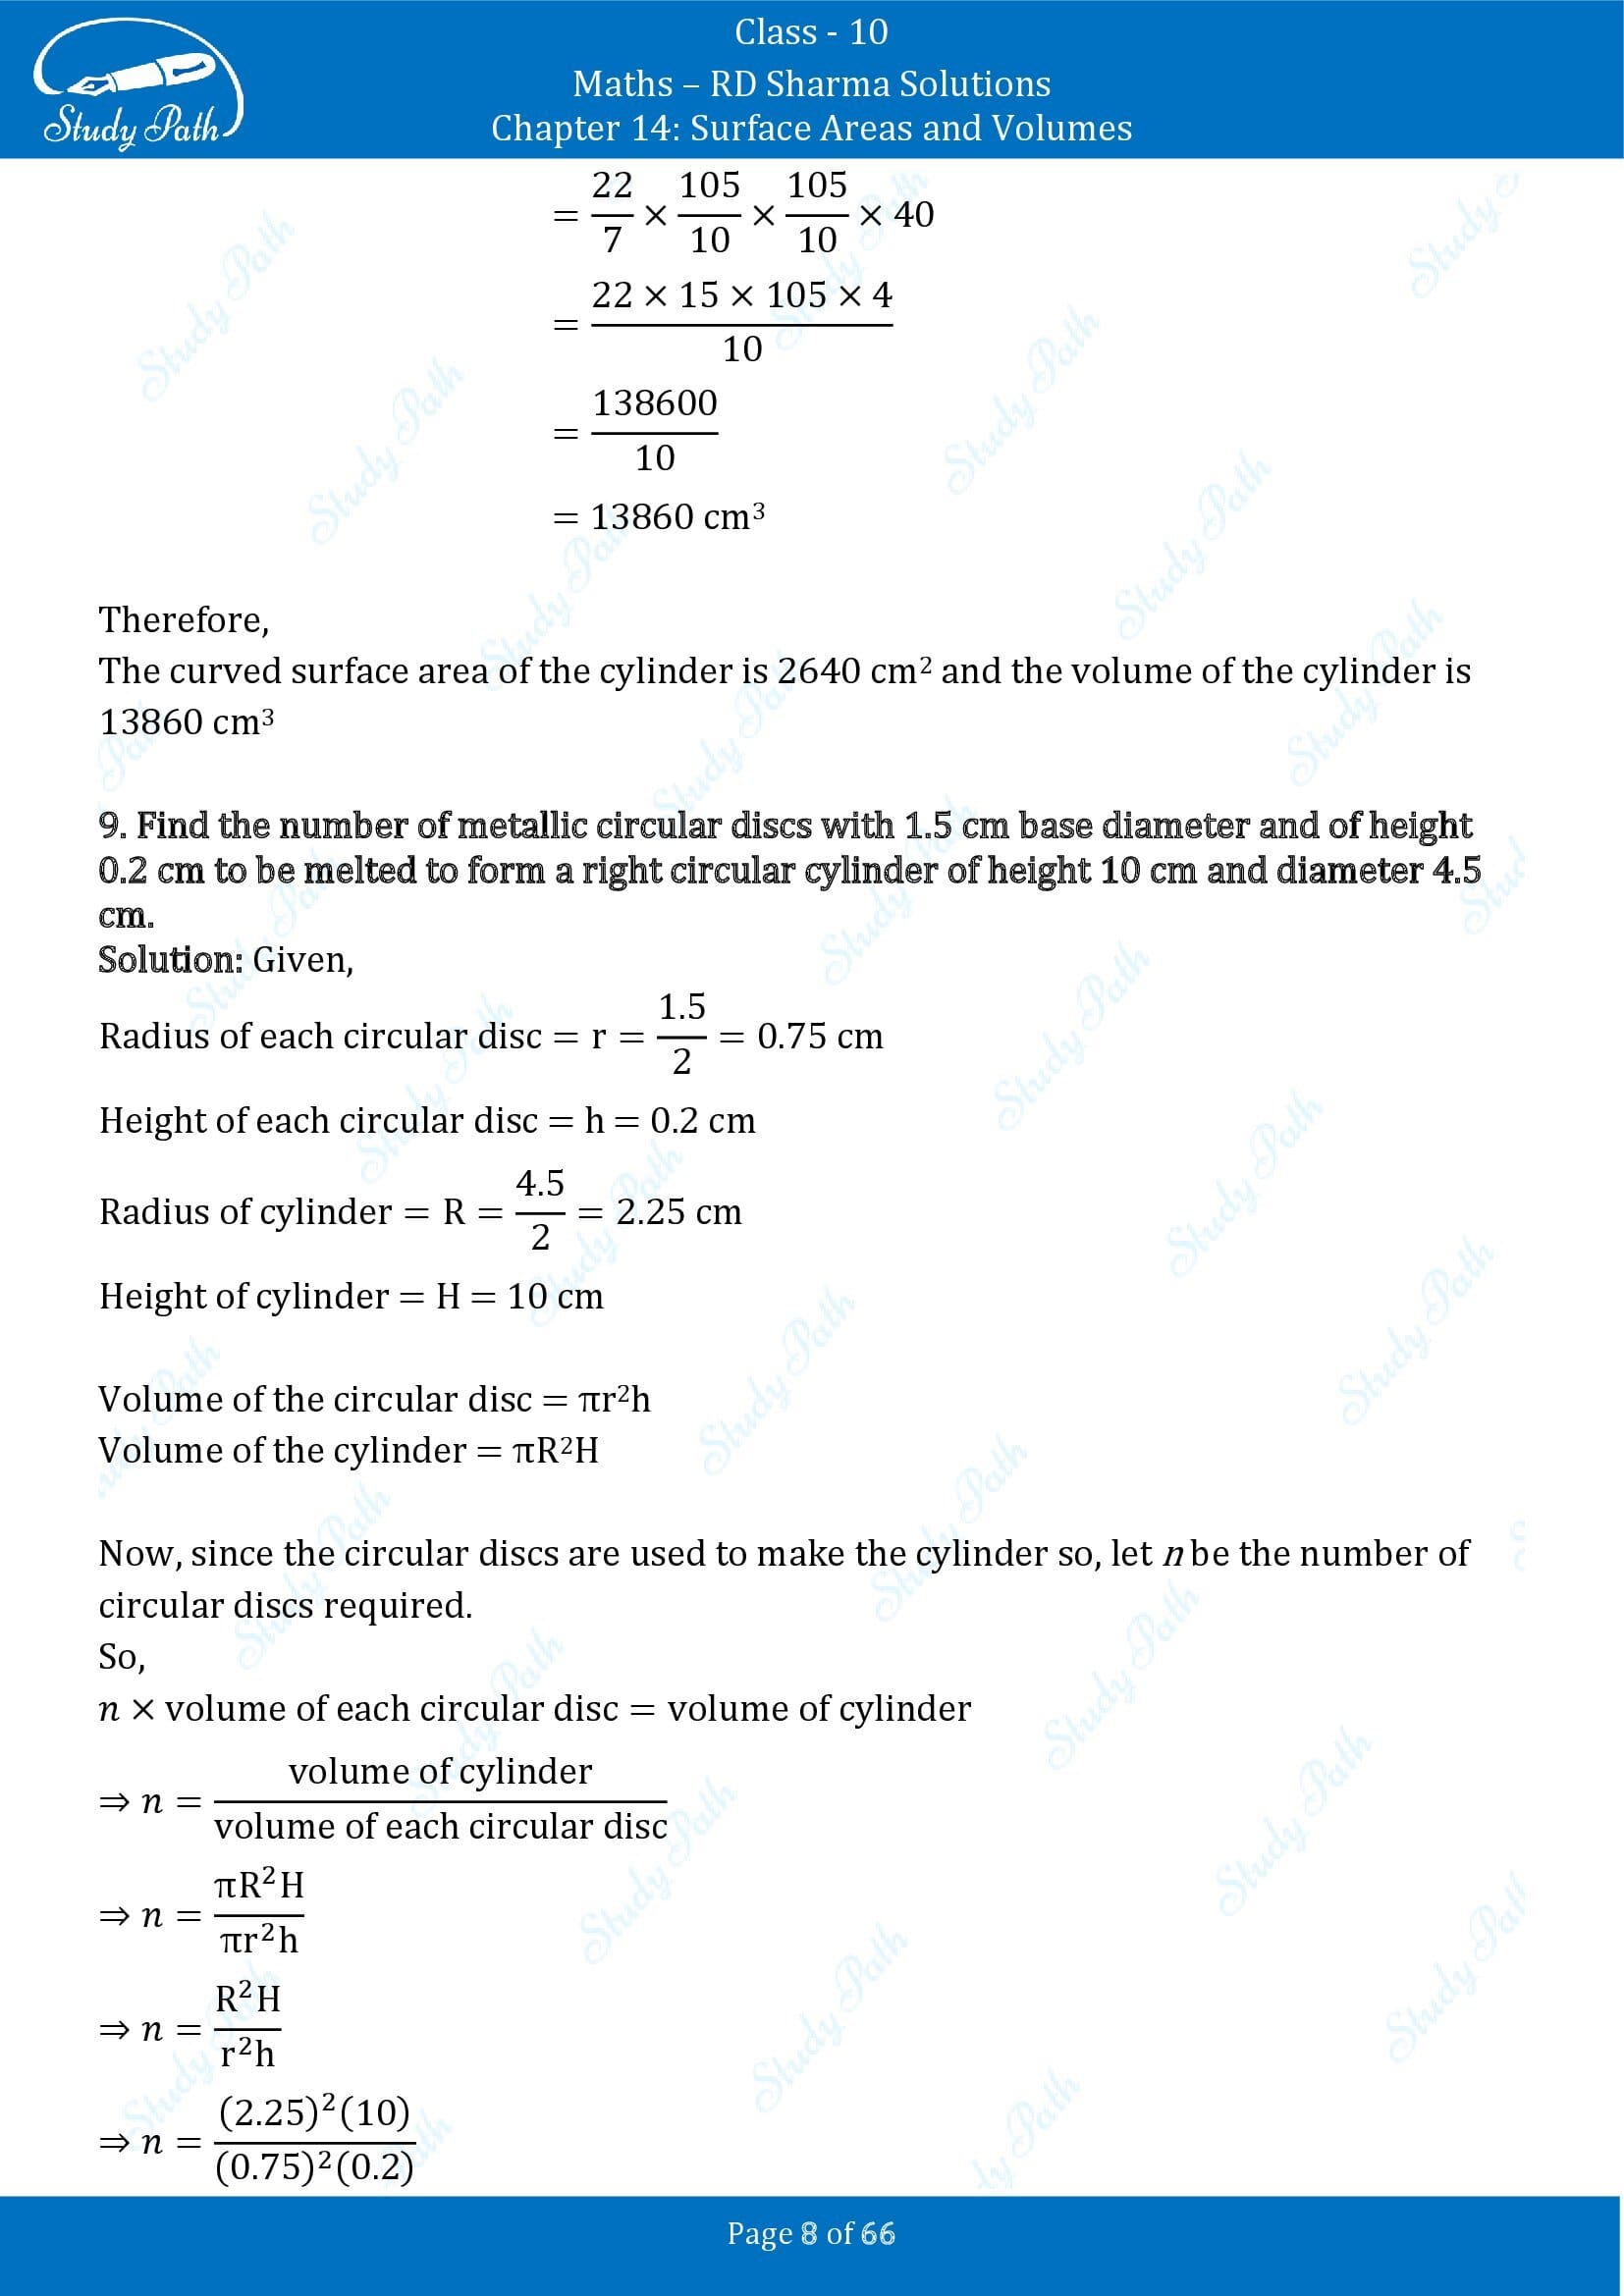 RD Sharma Solutions Class 10 Chapter 14 Surface Areas and Volumes Exercise 14.1 00008